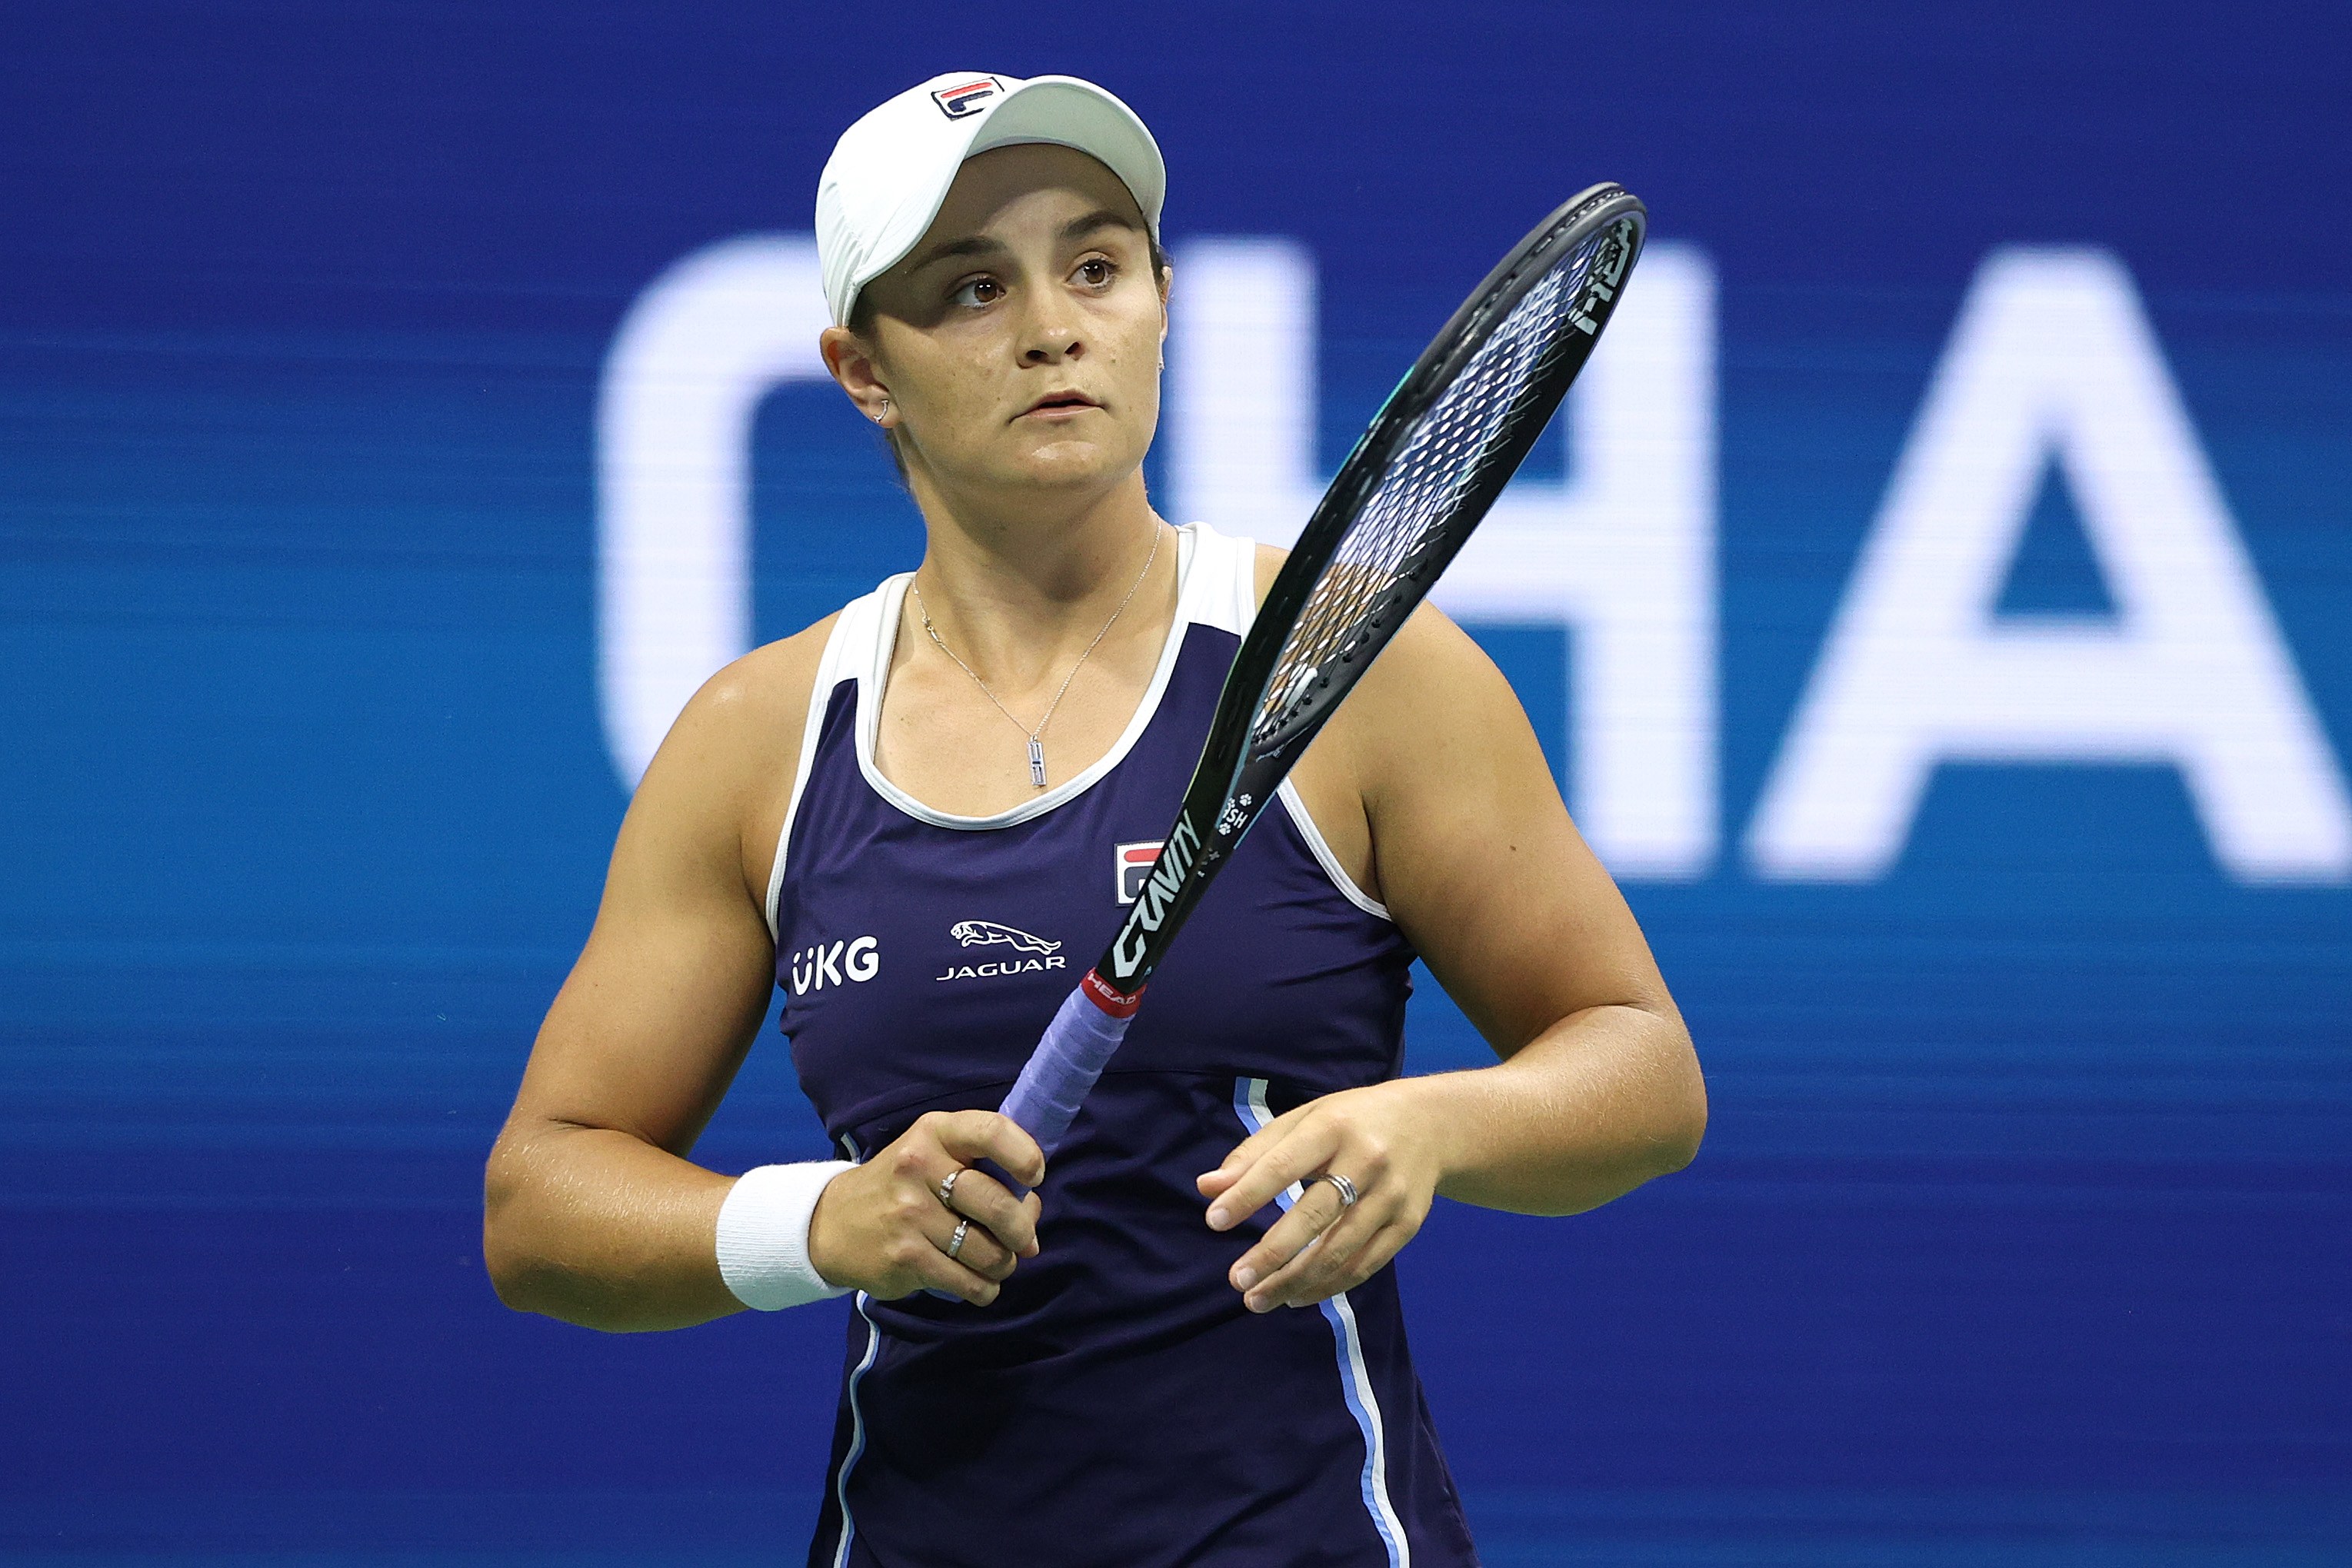 Australia's Ashleigh Barty Is Now the Number One Female Tennis Player